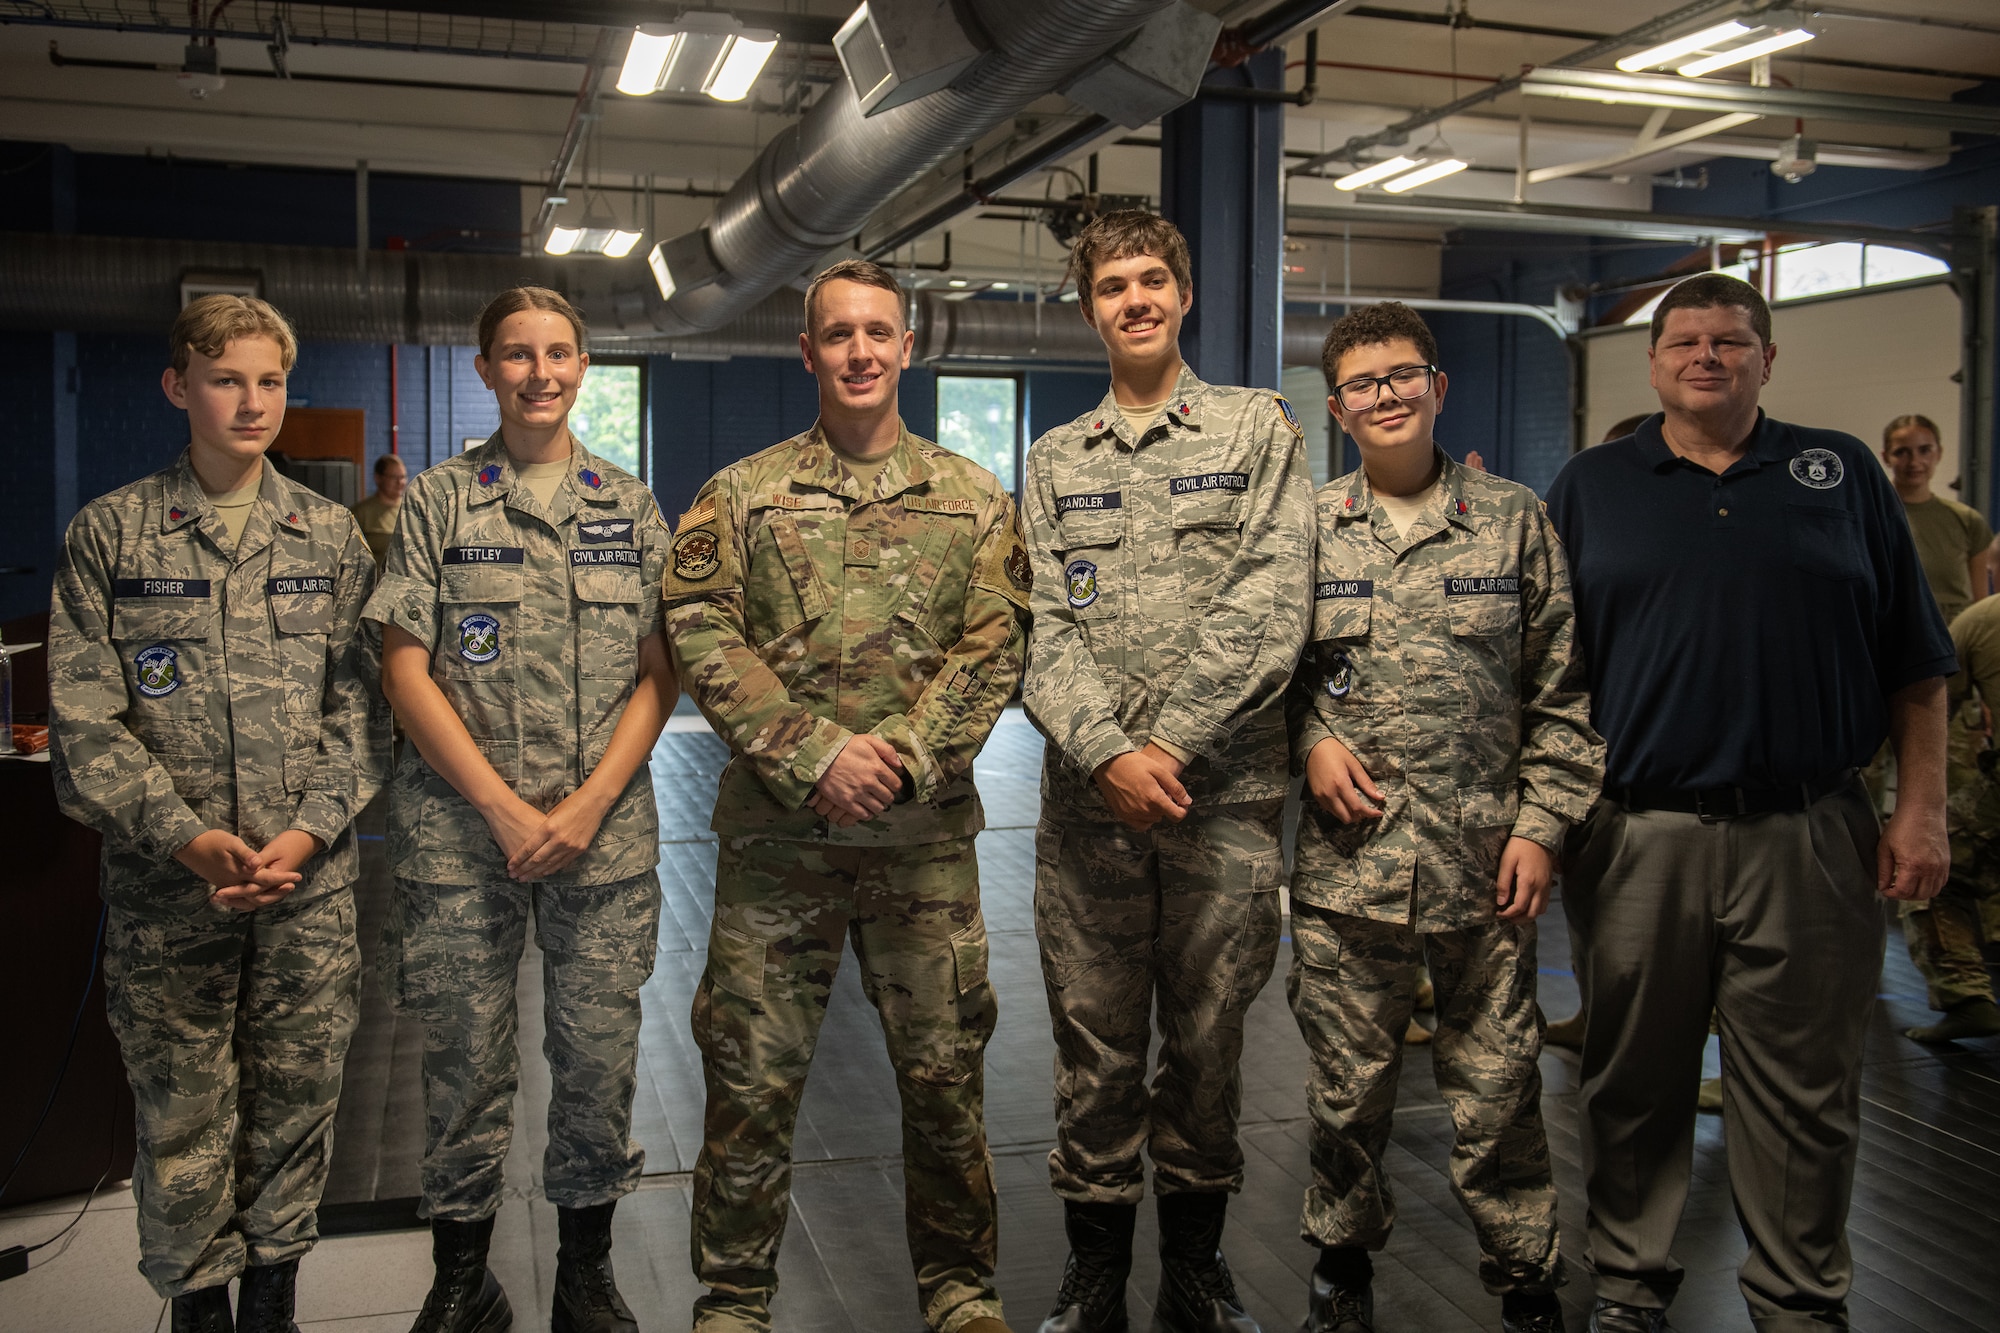 Six cadets pose for a group photo.